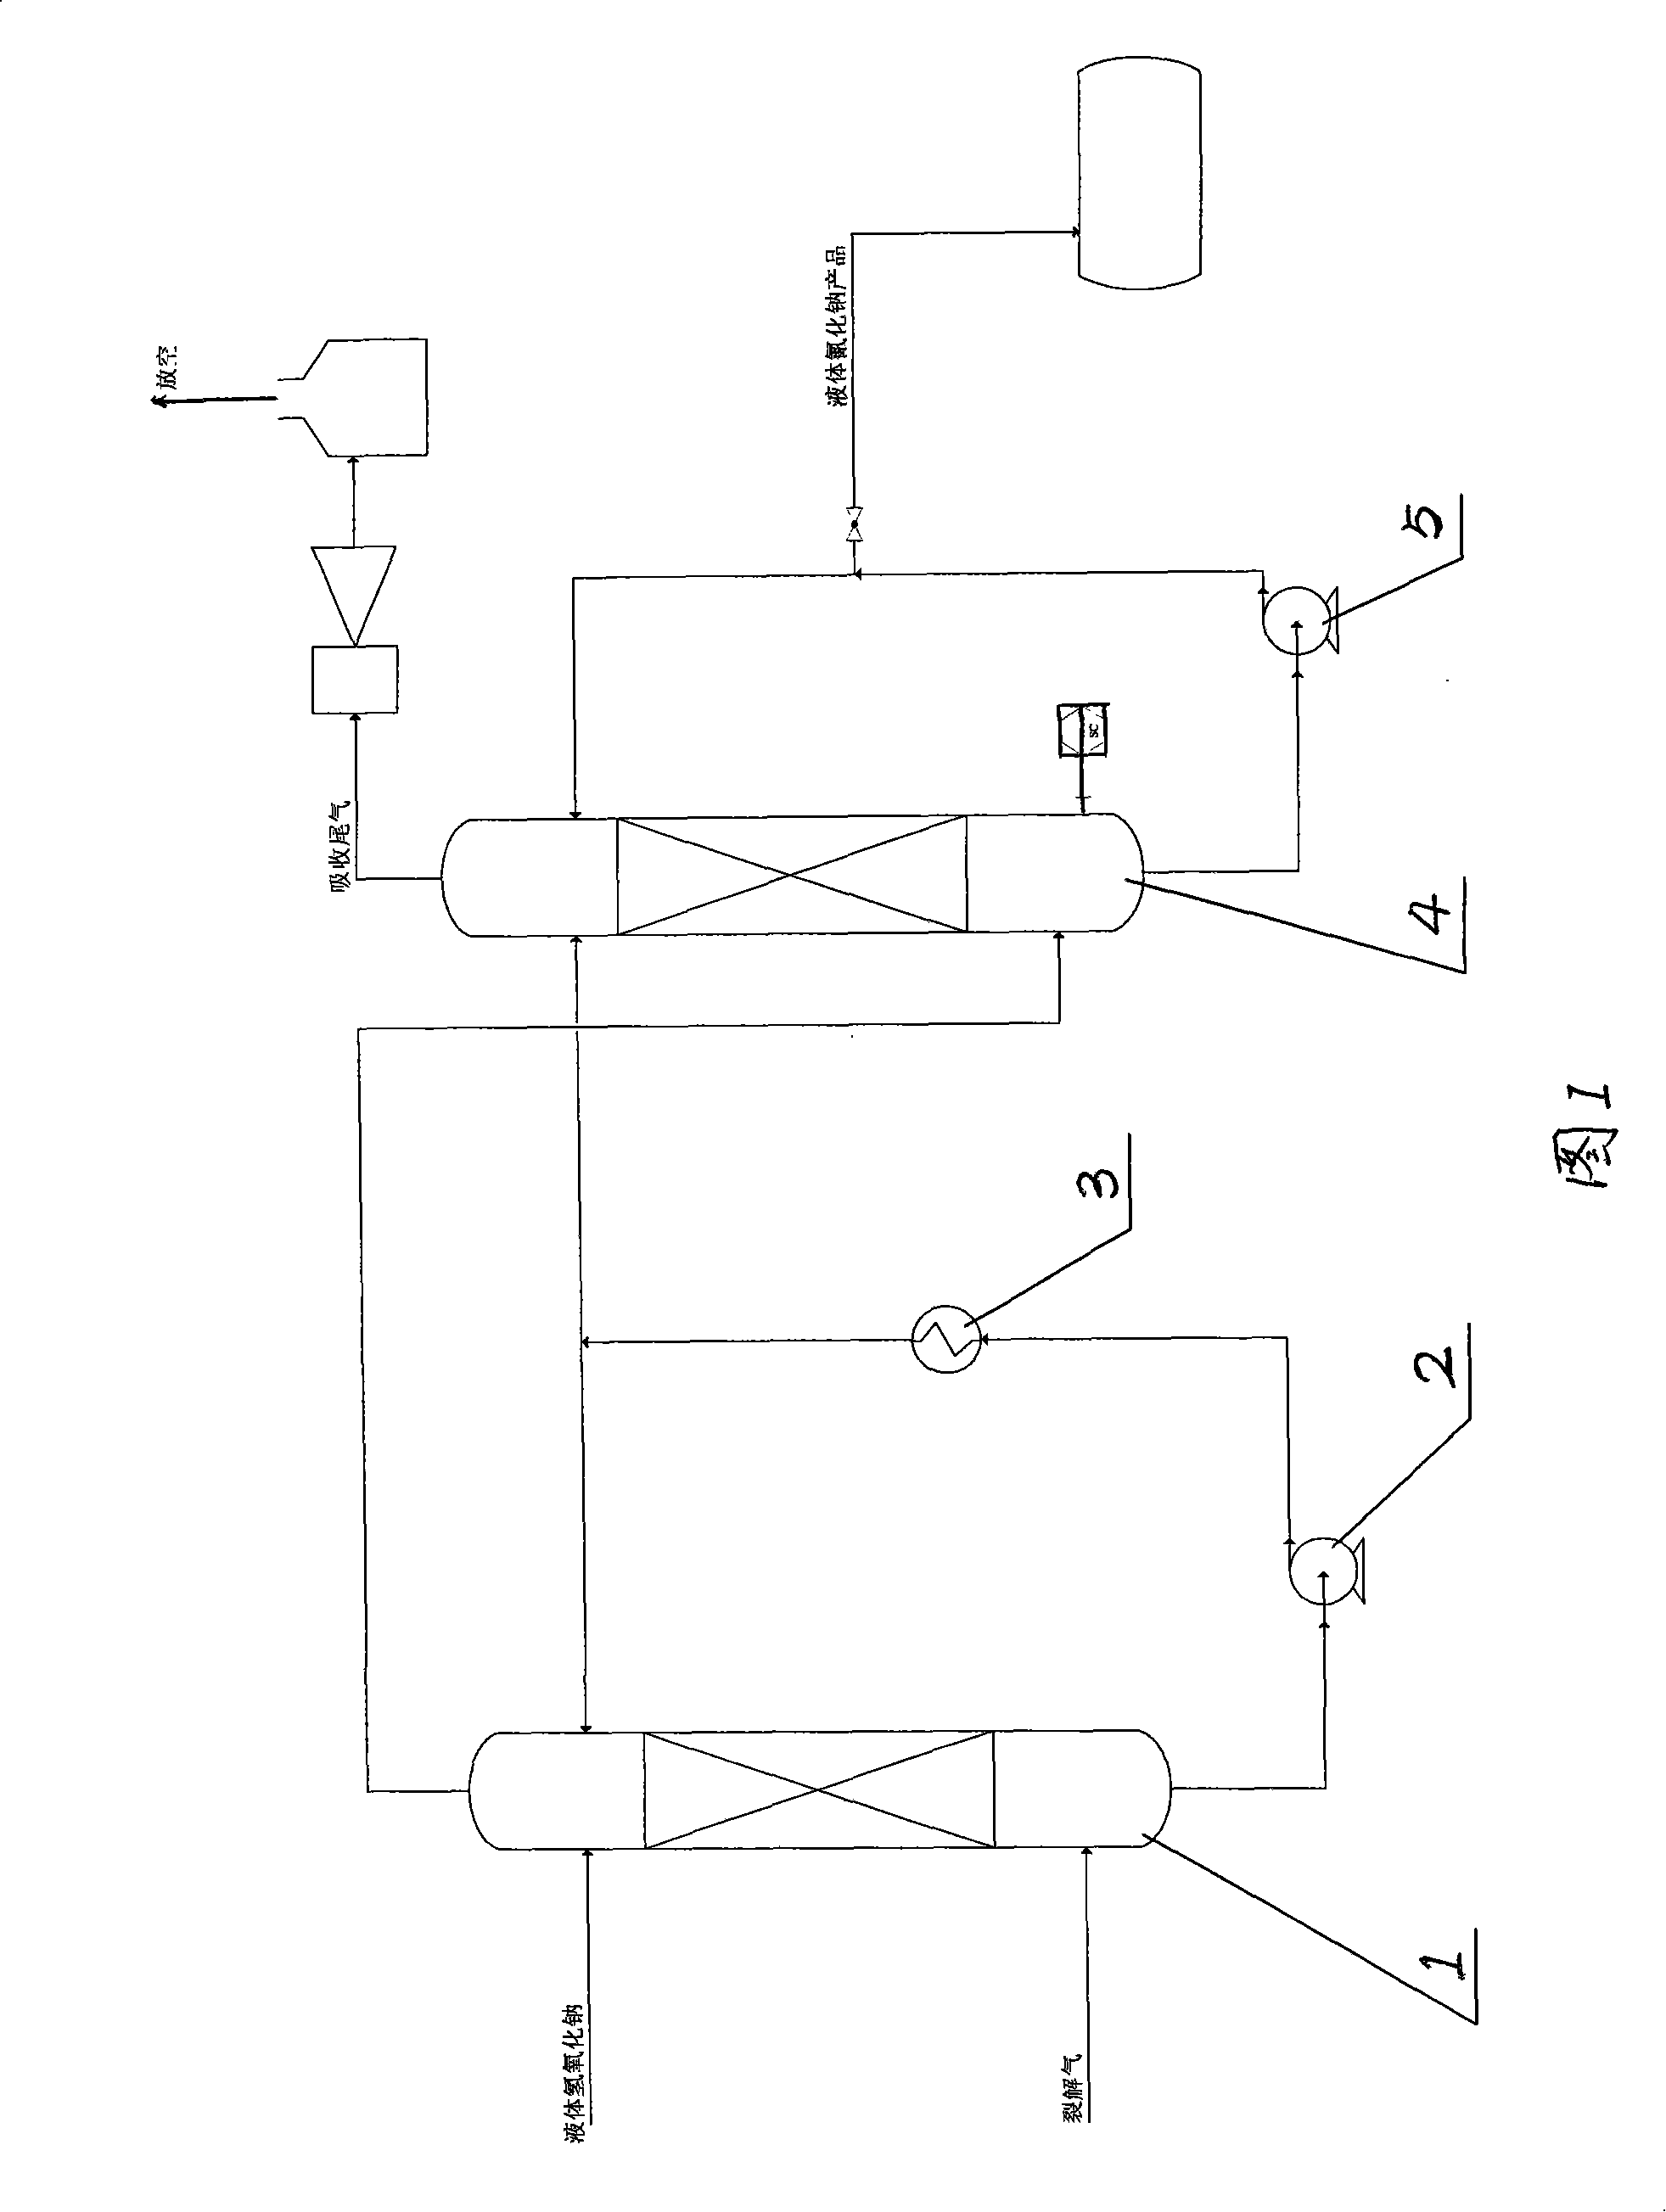 Method for producing liquid sodium cyanide by tailed-oil thermal-pyrolysis